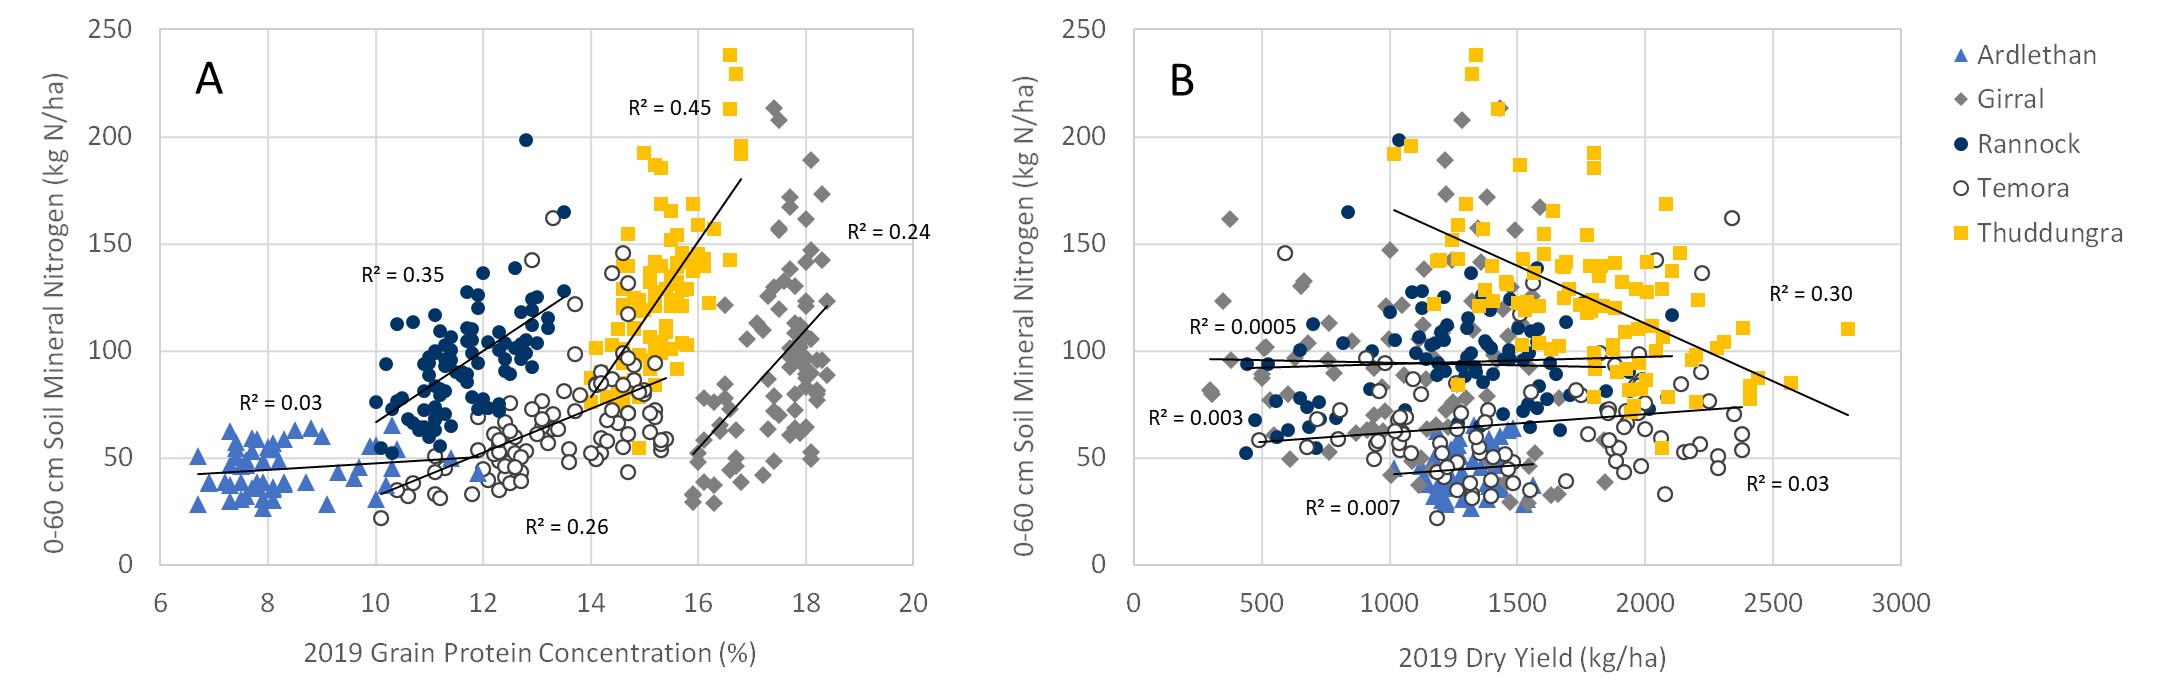 Figure 2. 0-60 cm Soil Mineral N (kg N/ha; sampled Feb-Mar 2020) versus 2019 cereal harvest results, (a) Grain Protein Concentration and (b) Dry Yield. (Girral = barley, rest = wheat). Each point represents one grid site (n = 425). 